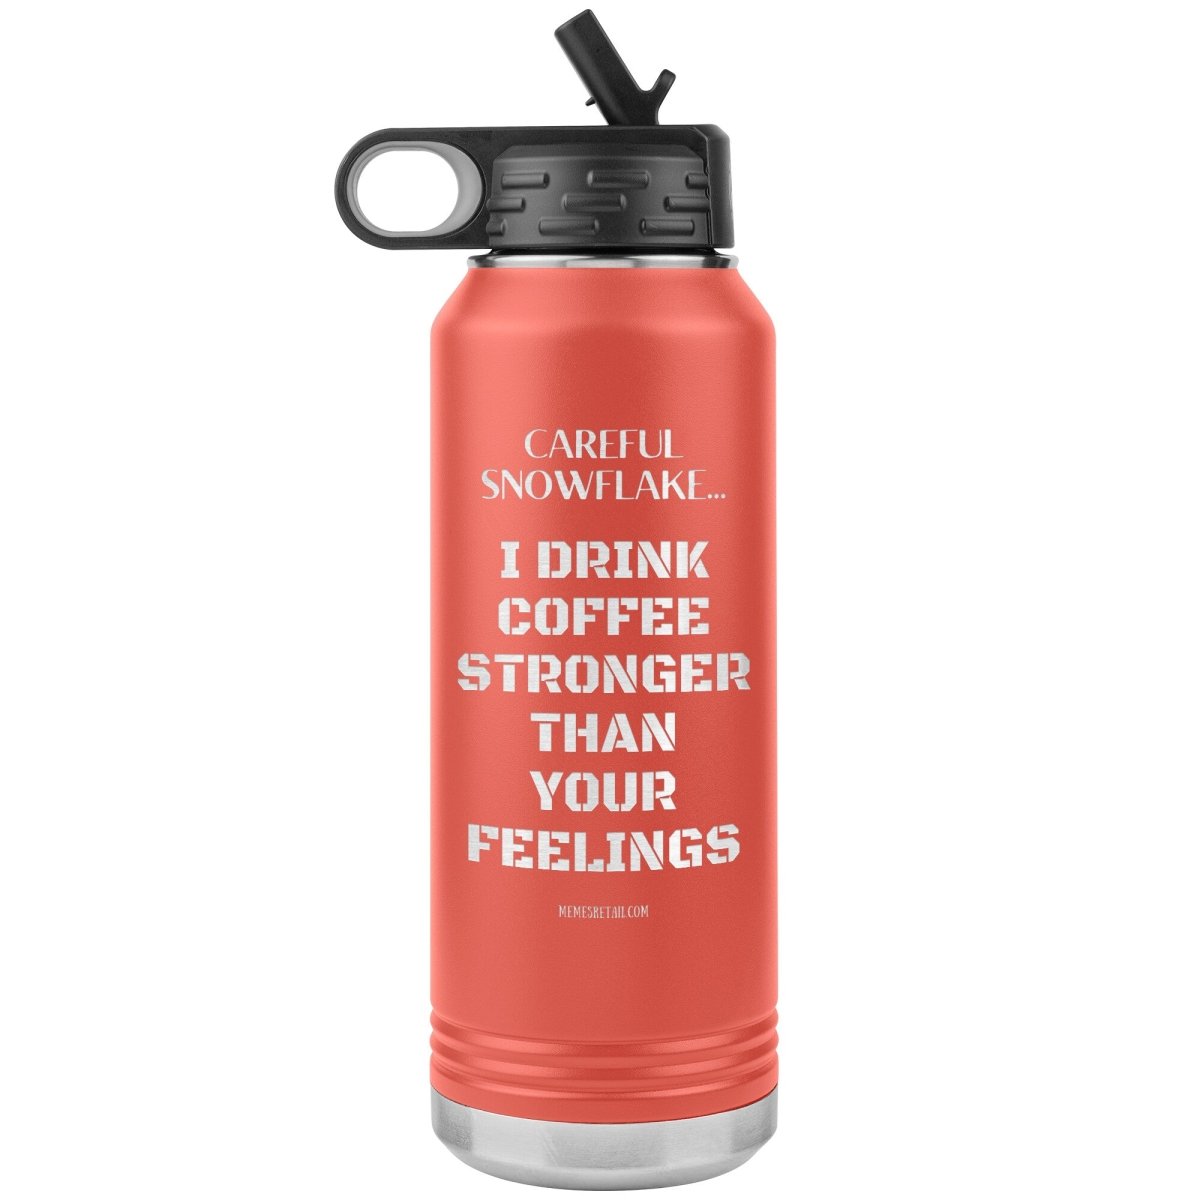 Careful Snowflake... I Drink Coffee Stronger Than Your Feelings 32 oz Water Bottle, Coral - MemesRetail.com